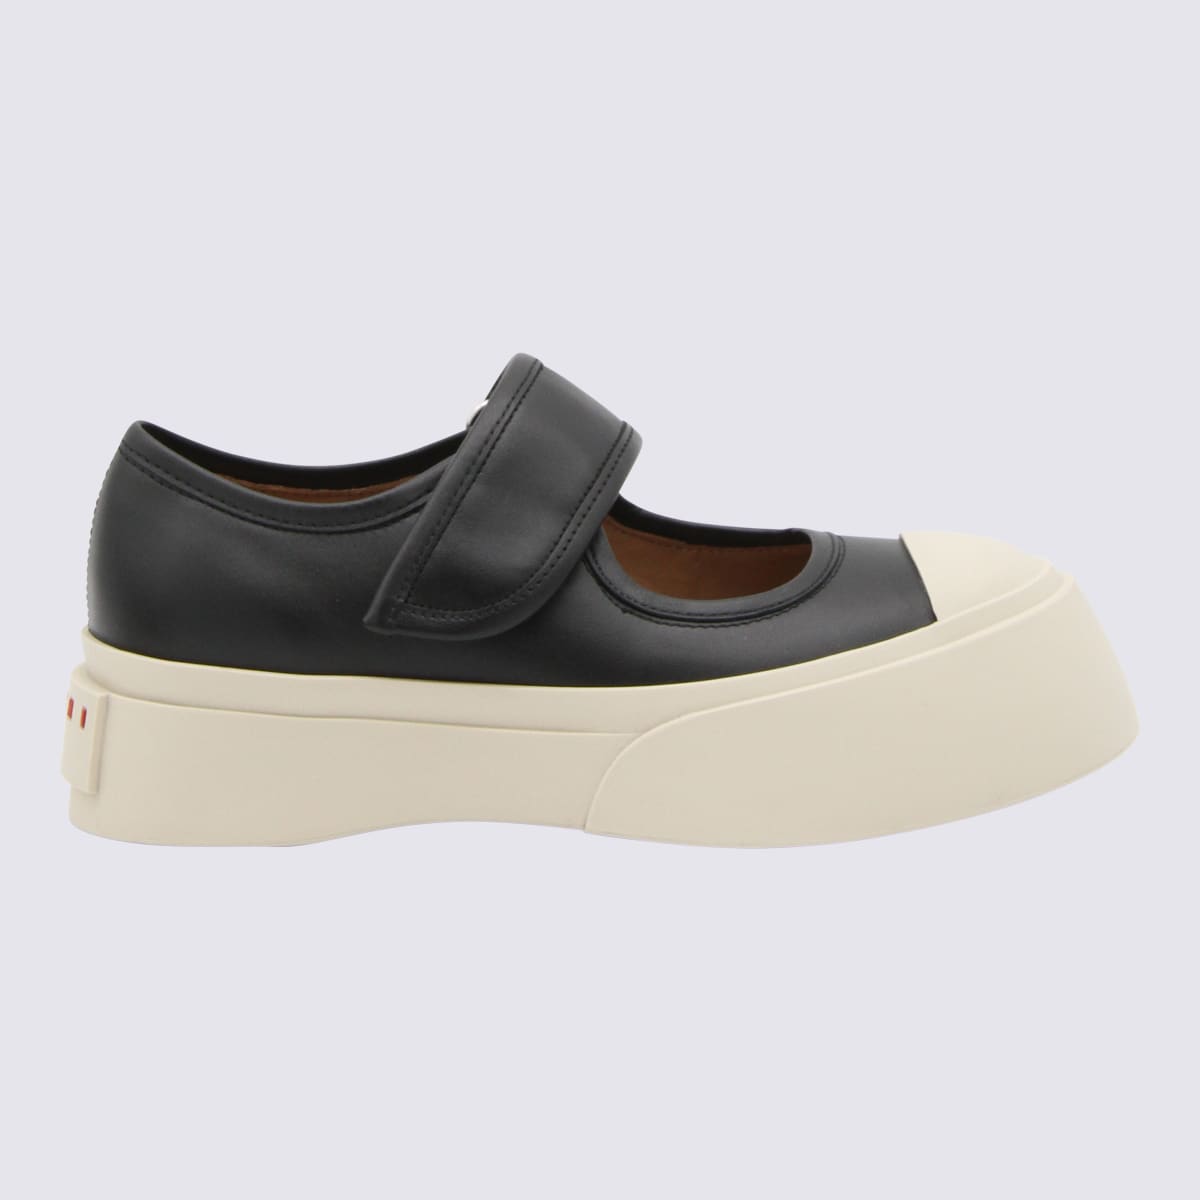 Black Leather Mary Jane Pablo Sneakers